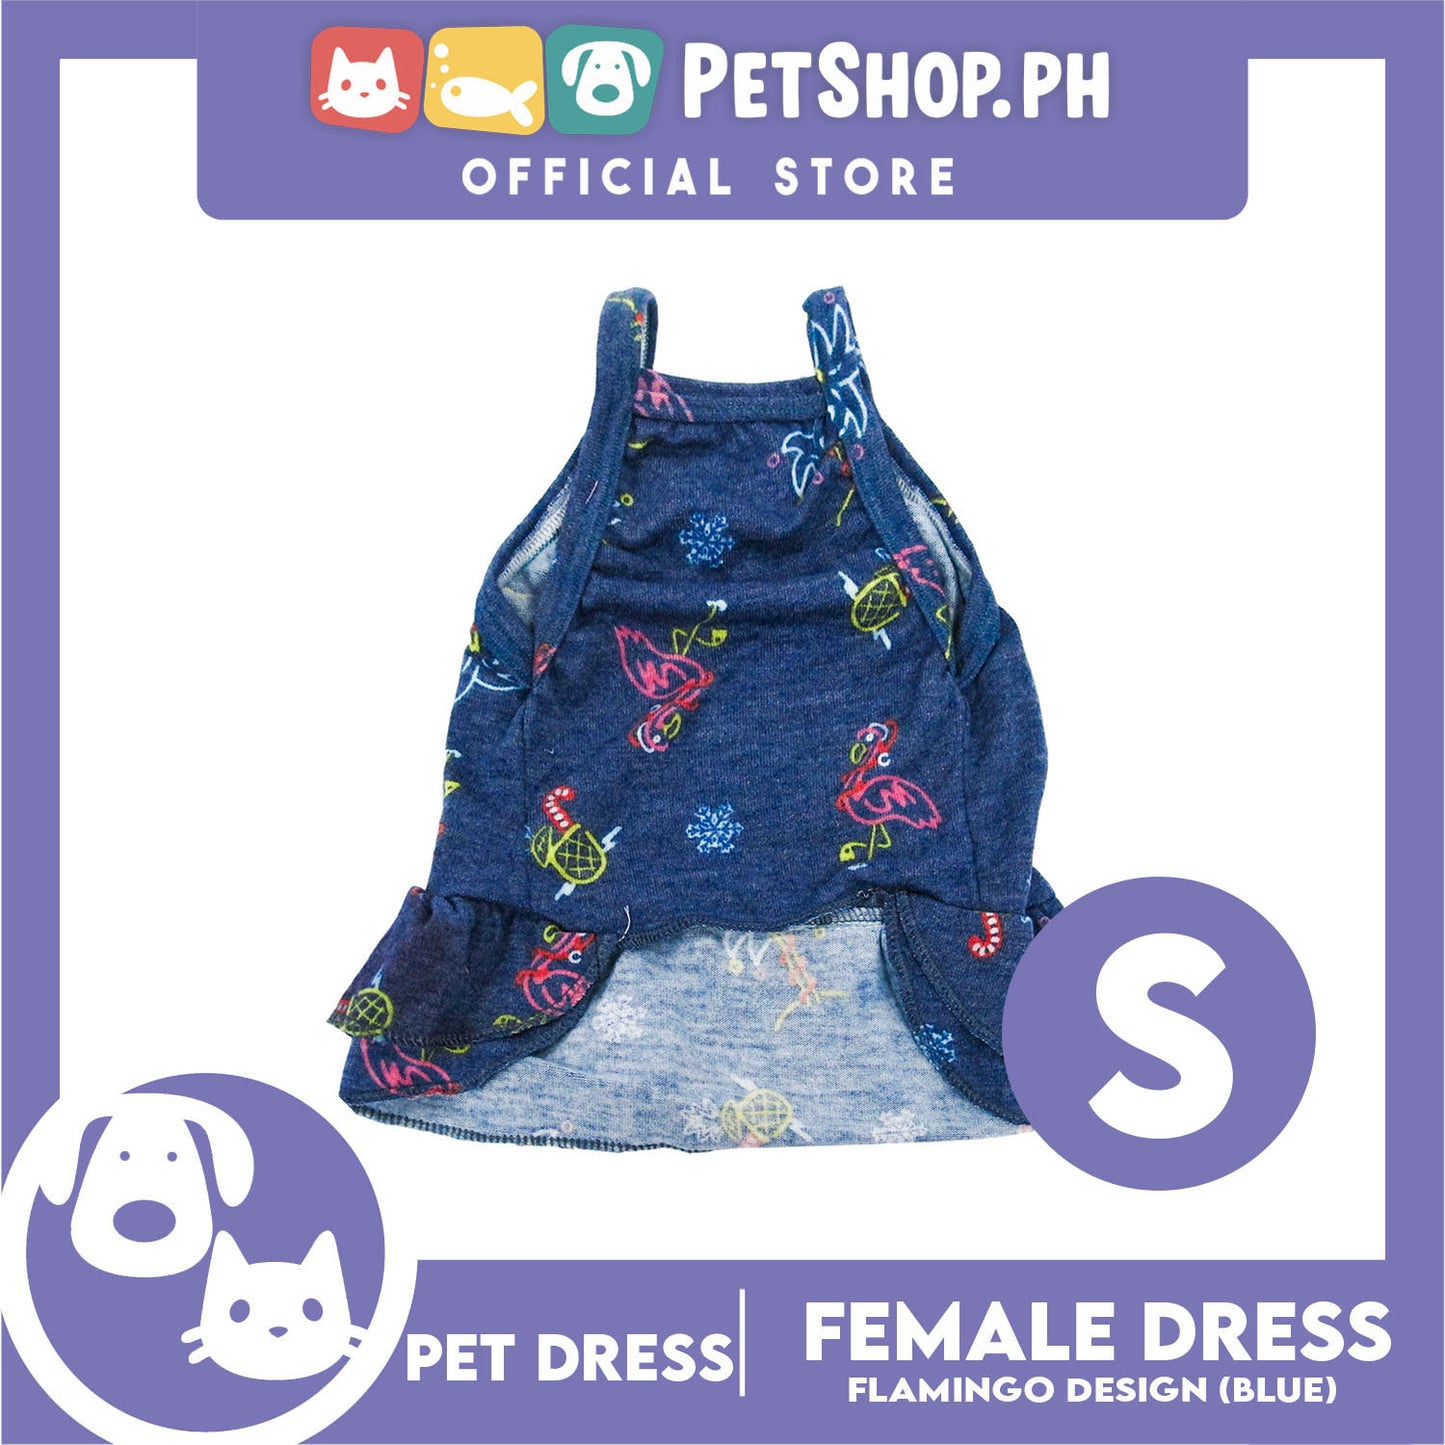 Pet Dress Flamingo Design Skirt Blue (Small) Perfect fit for Small Breed Dogs and Cats